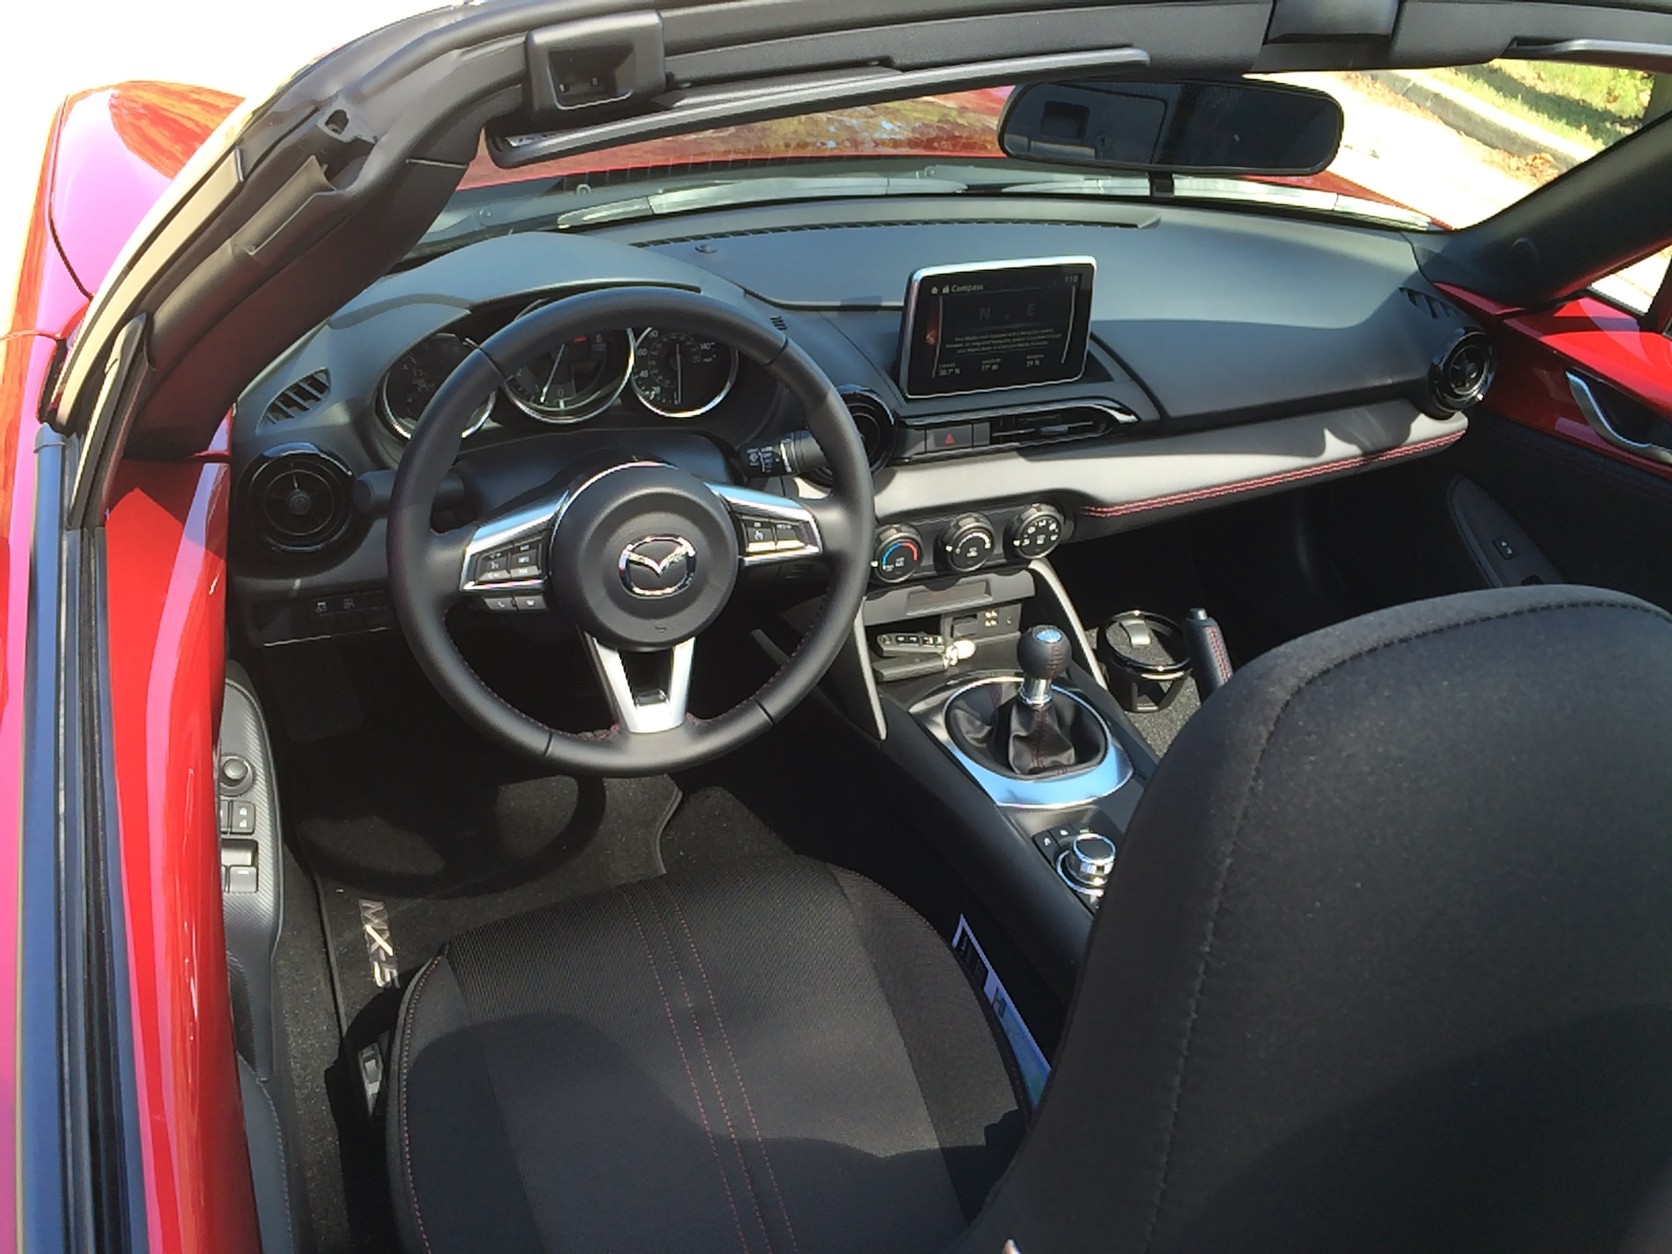 The interior is very driver-focused, with easy-to-see gauges. (WTOP/Mike Parris)